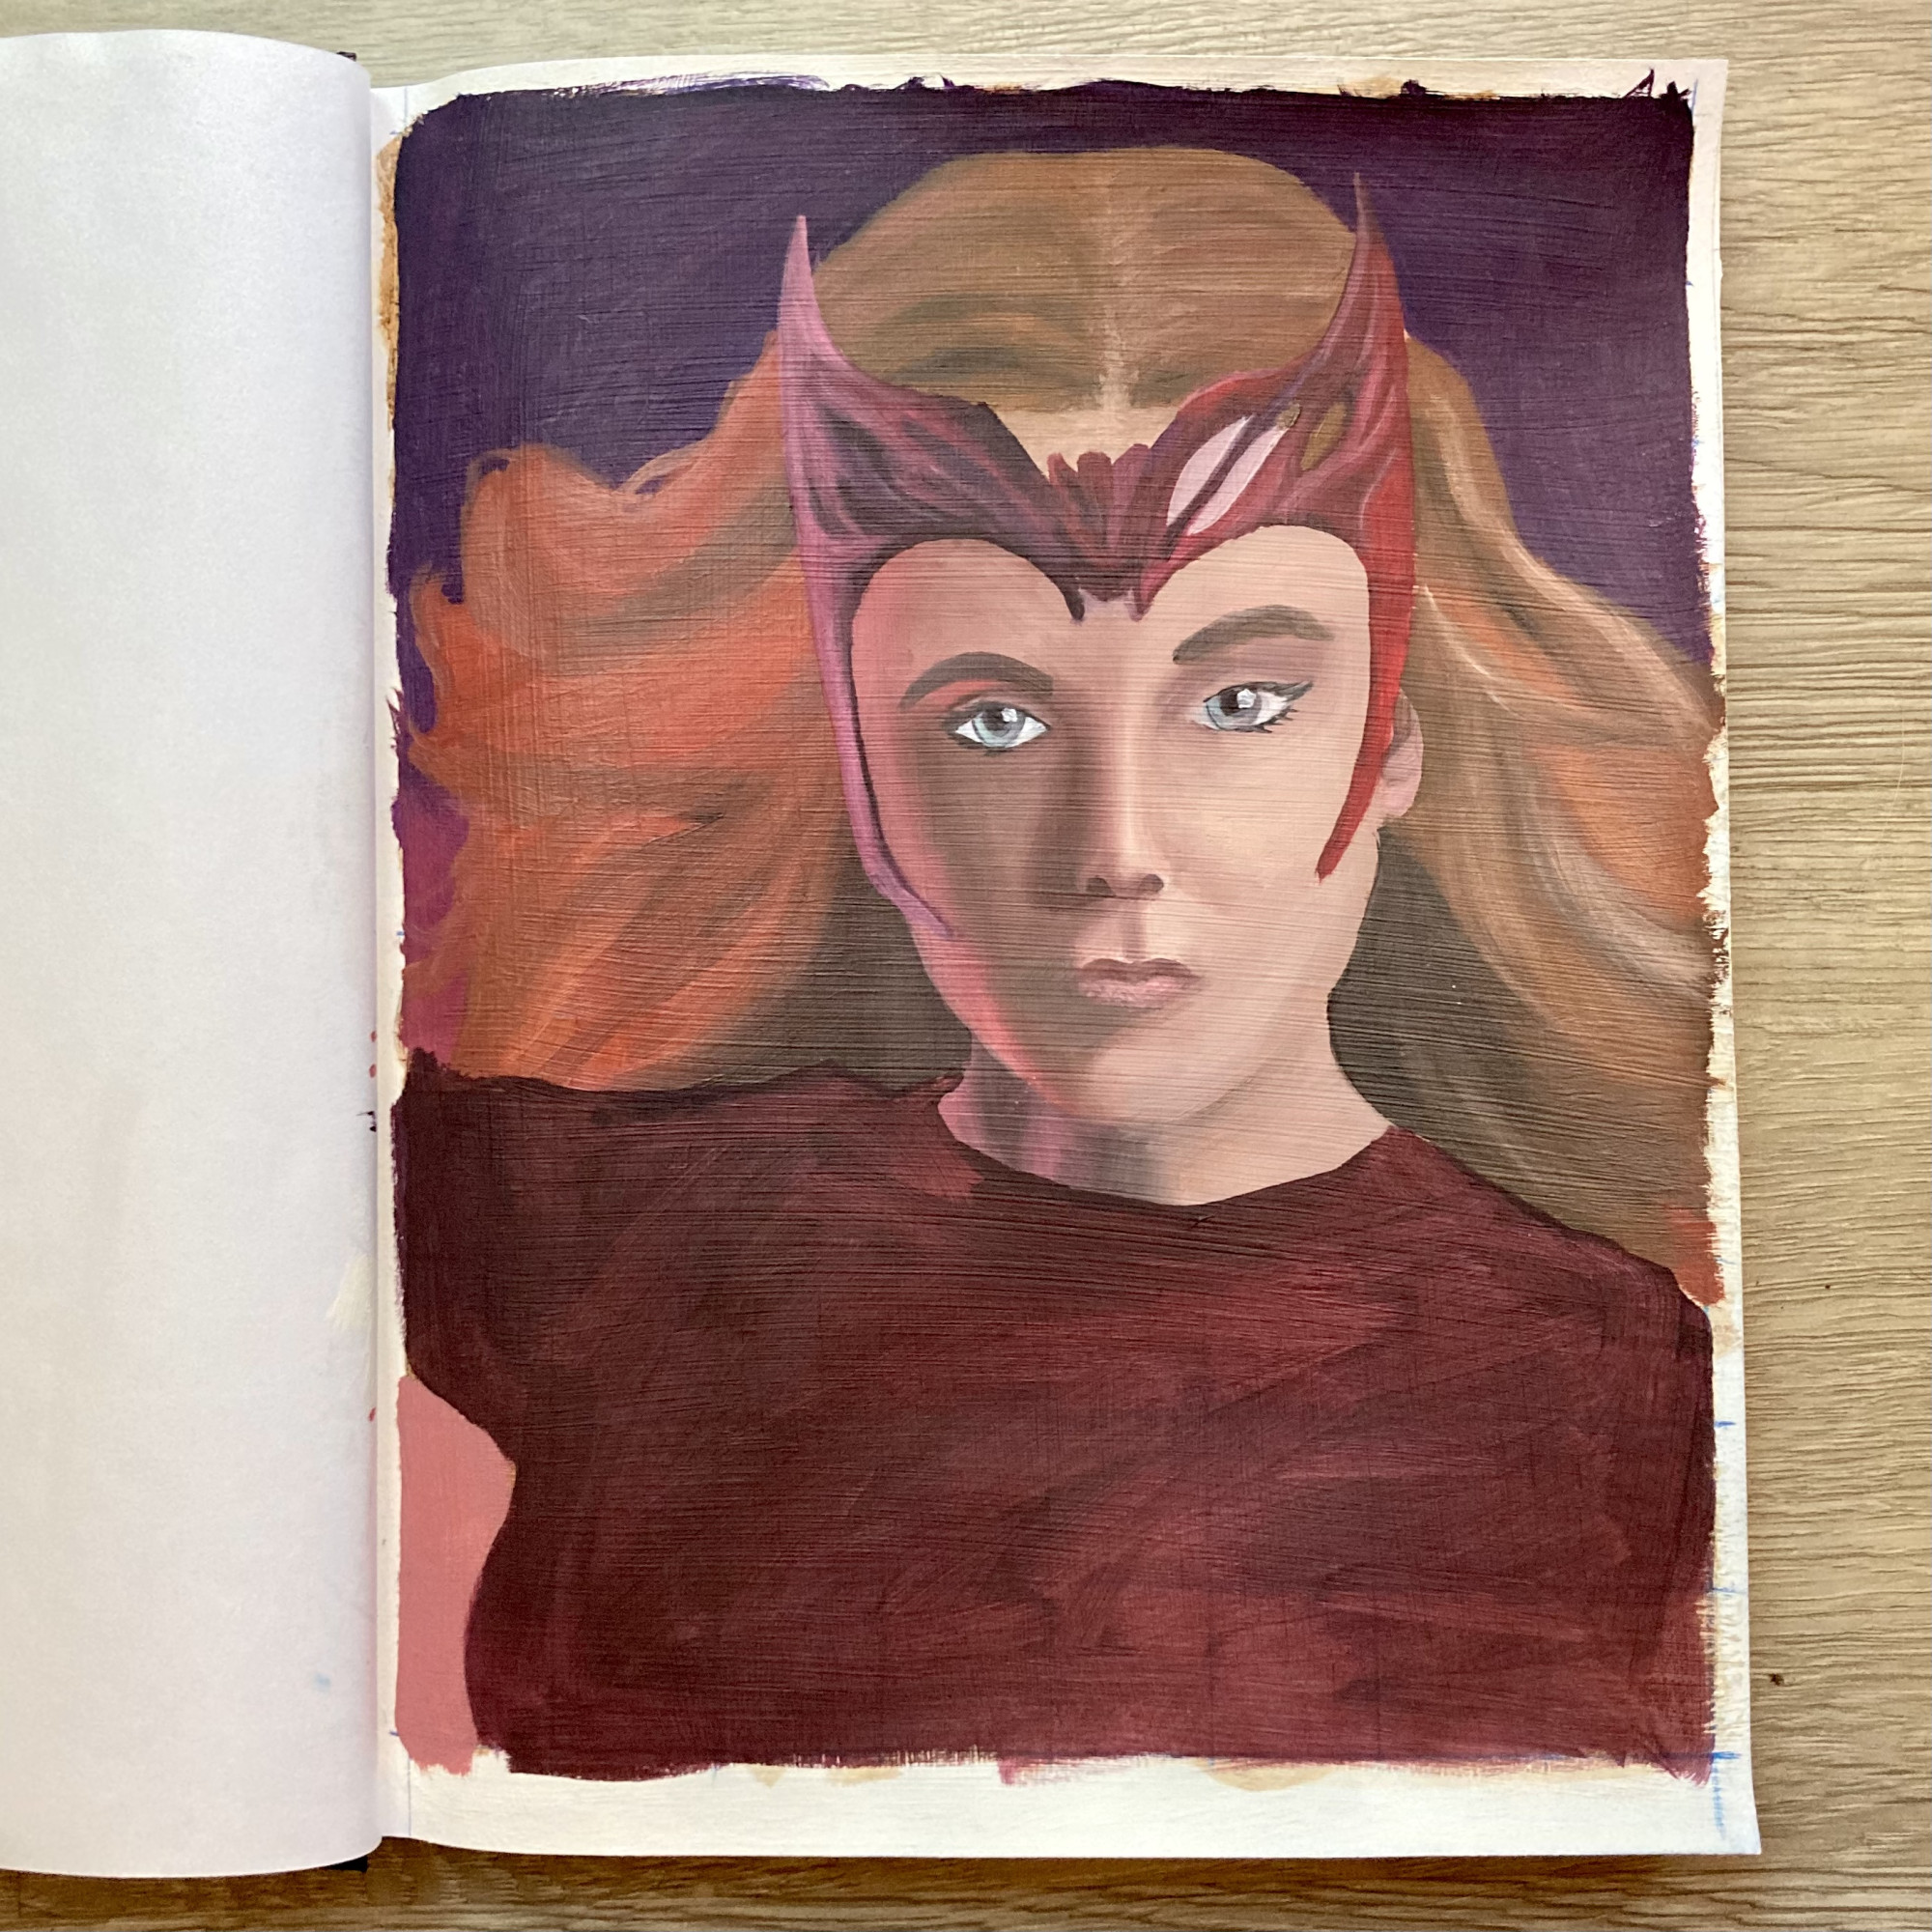 A painting of the Marvel character Scarlet Witch, partially unfinished, in a sketchbook